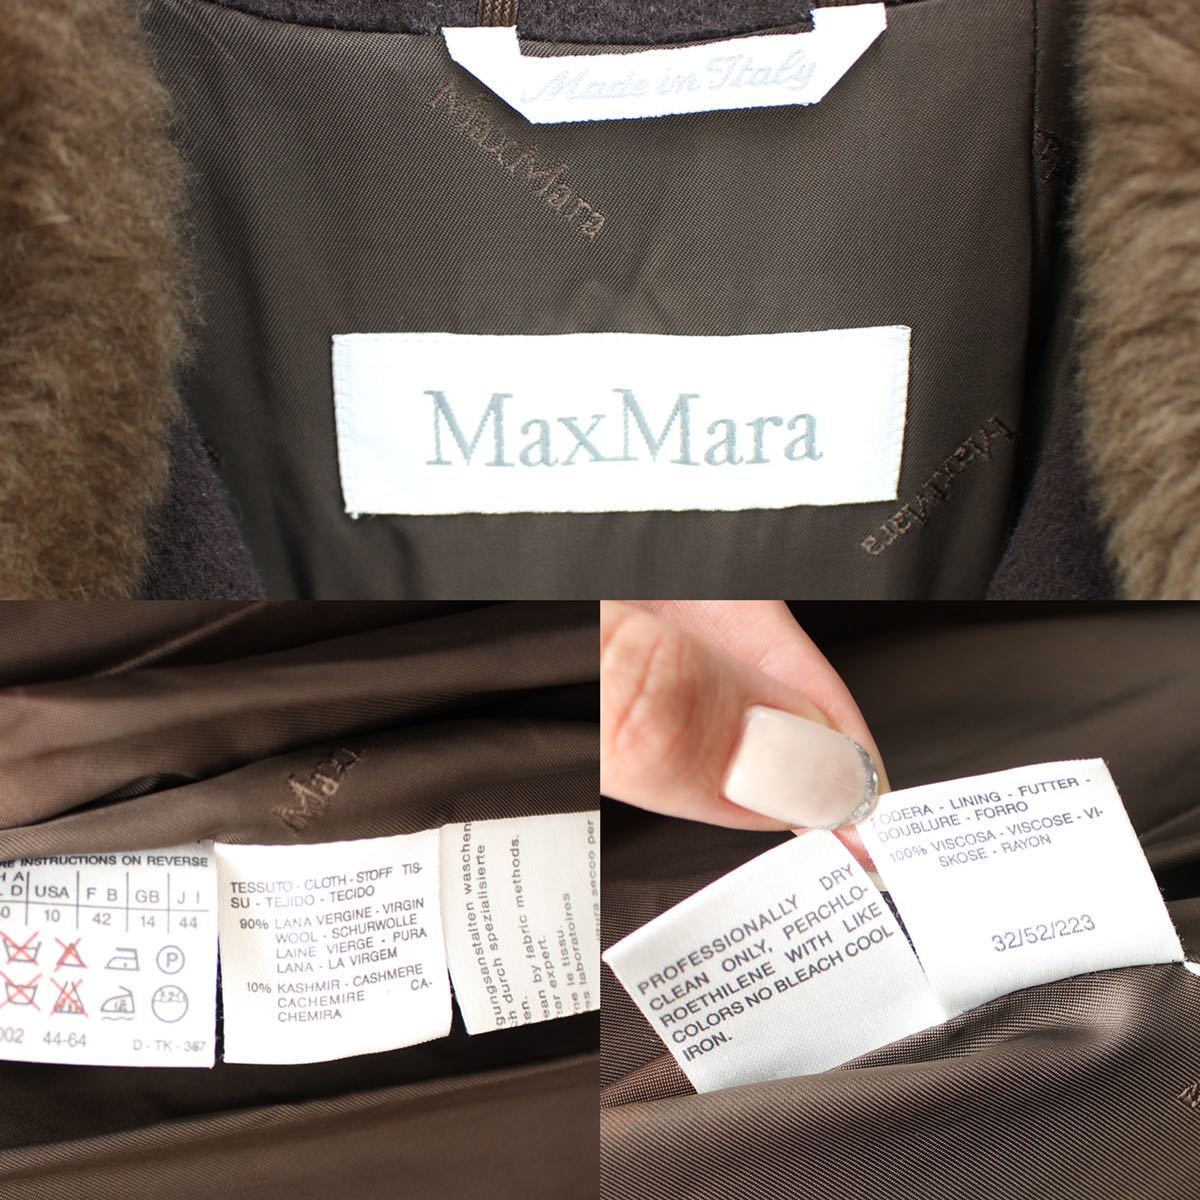 MAX MARA WHITE TAG CASHMERE BREND WOOL FUR CHESTERFIELD COAT